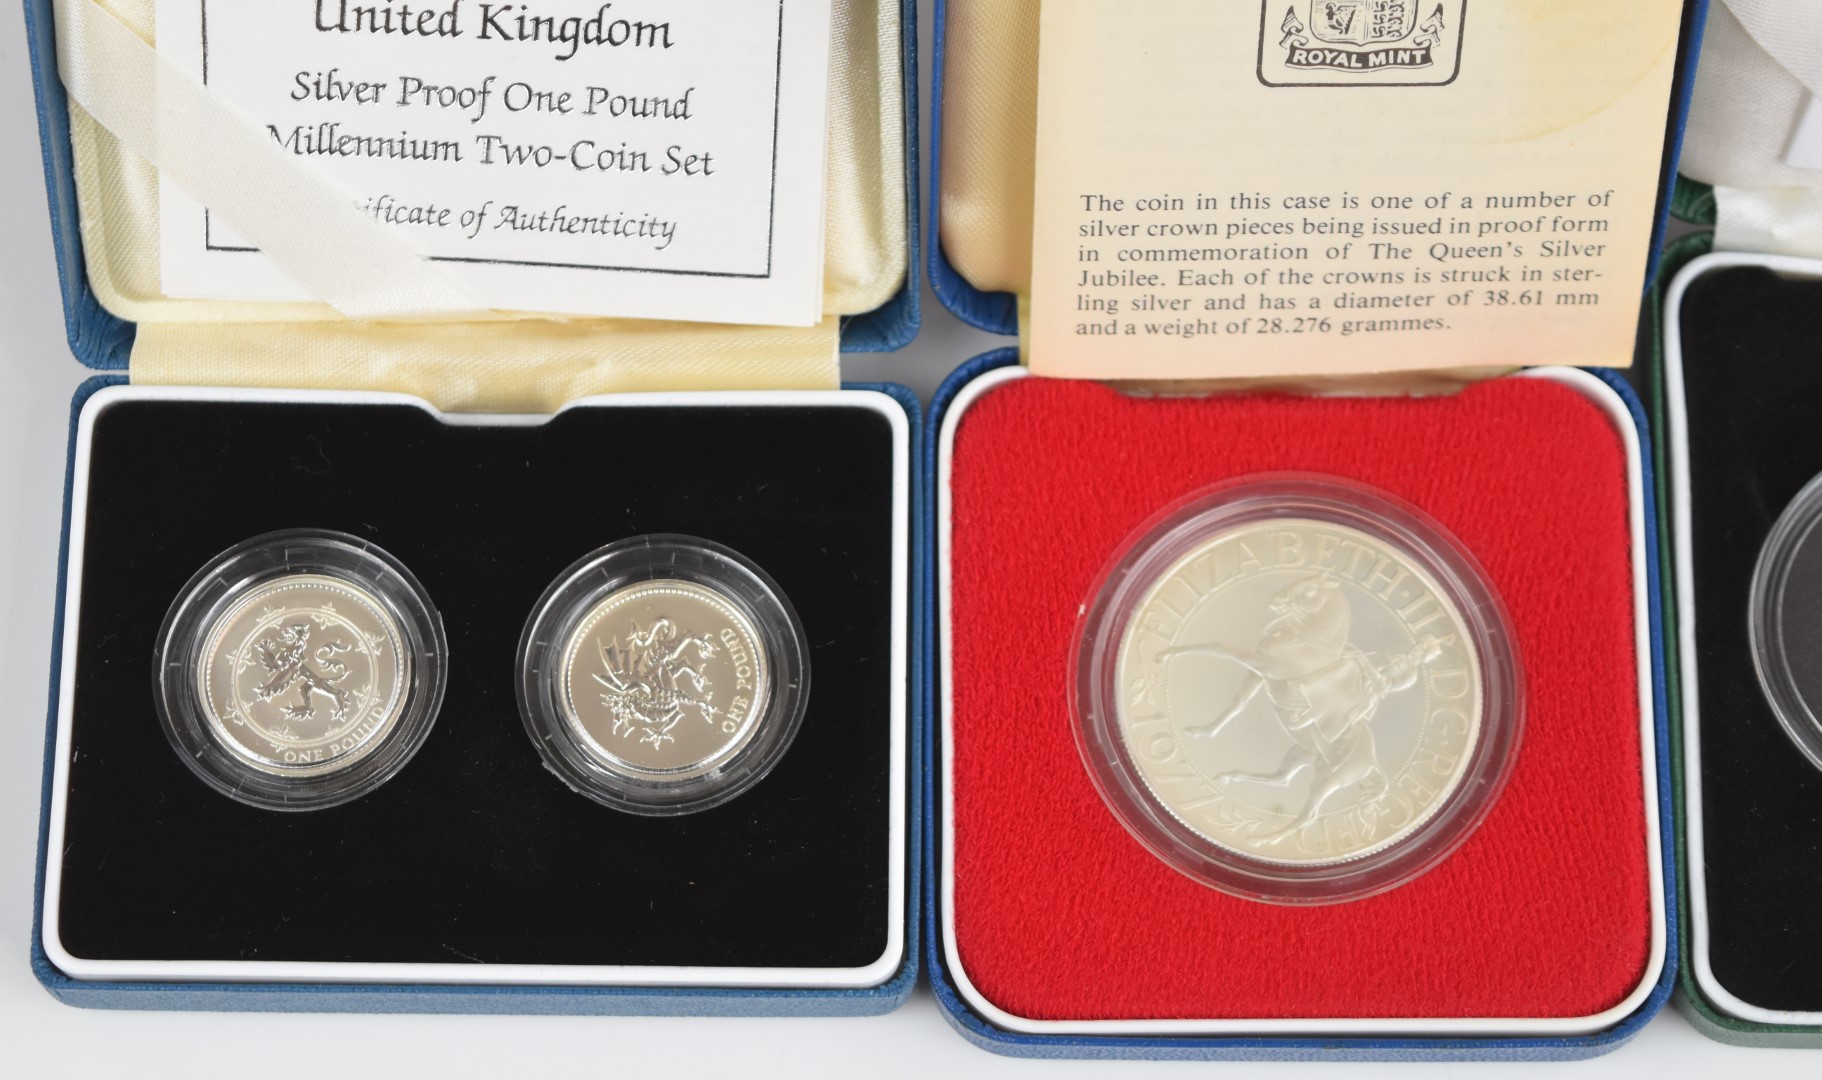 Six Royal Mint commemorative silver proof coins comprising a 1999 - 2000 set of two Millennium £1 - Image 2 of 3